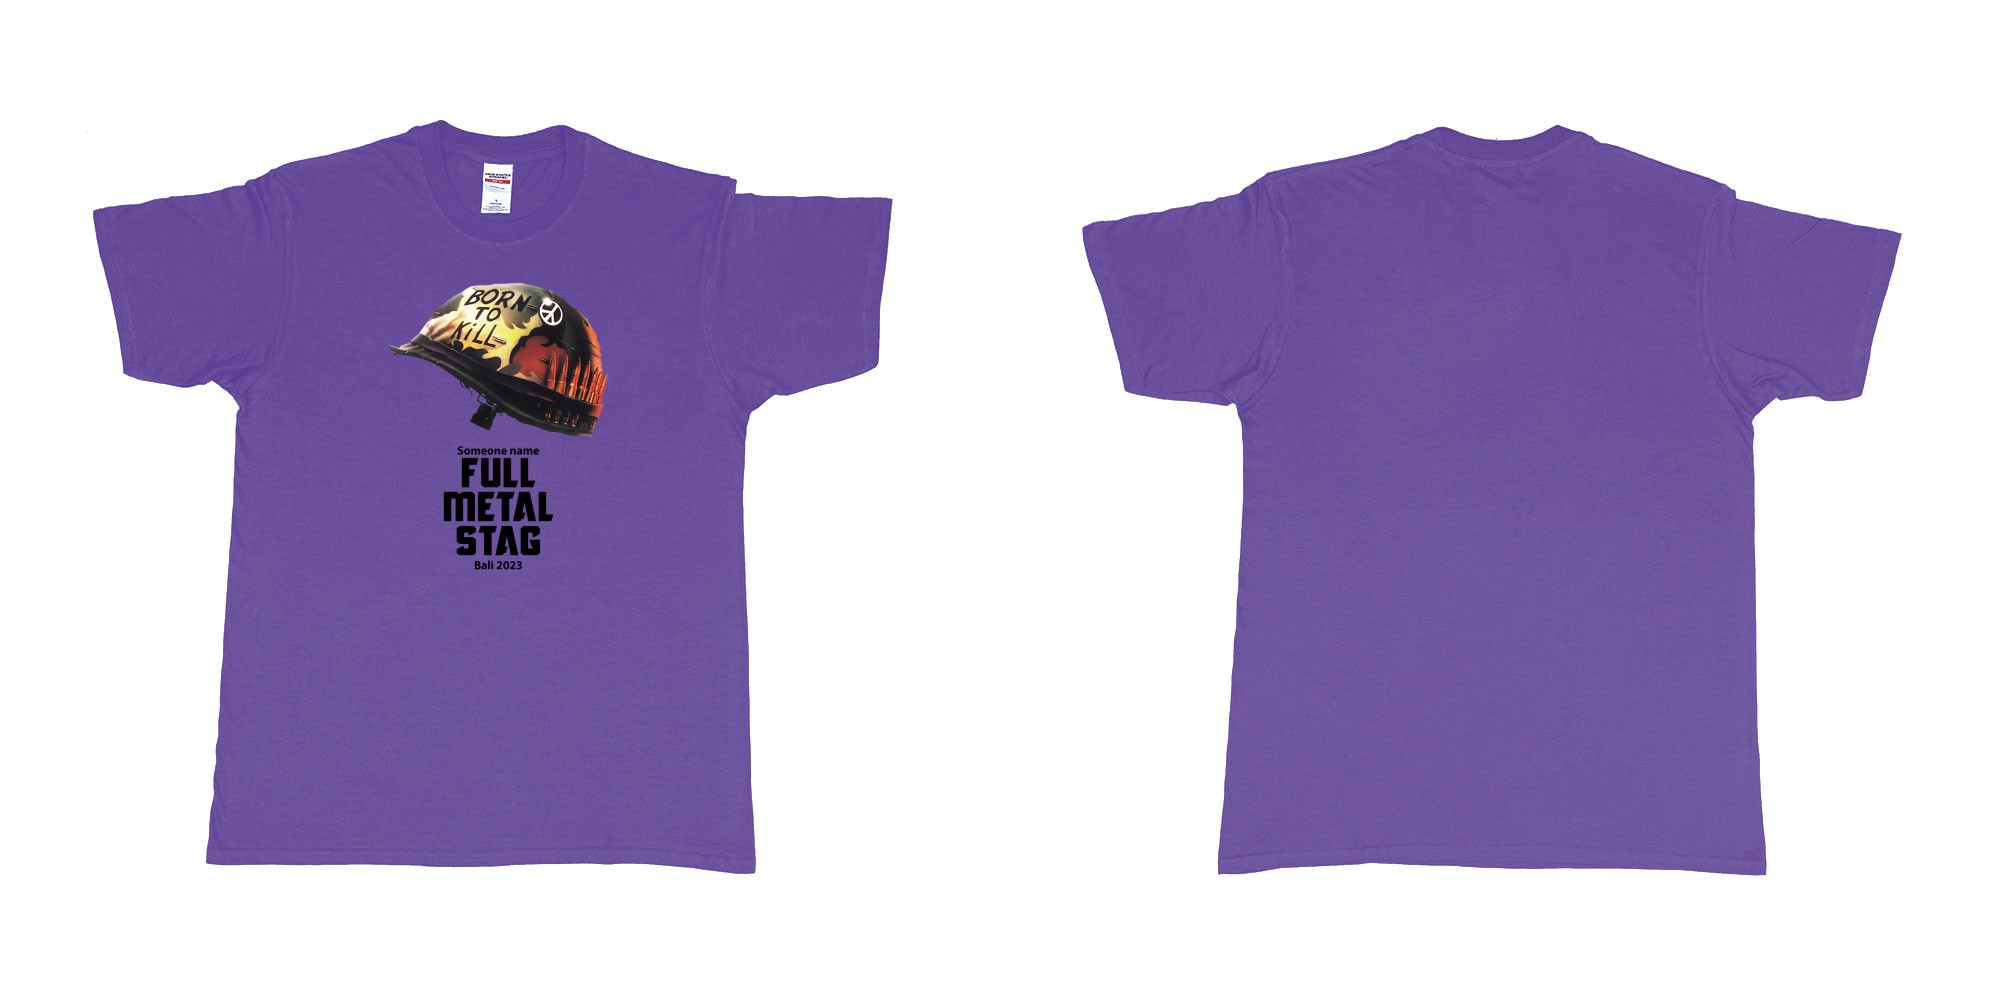 Custom tshirt design Full Metal Jacket Stag in fabric color purple choice your own text made in Bali by The Pirate Way